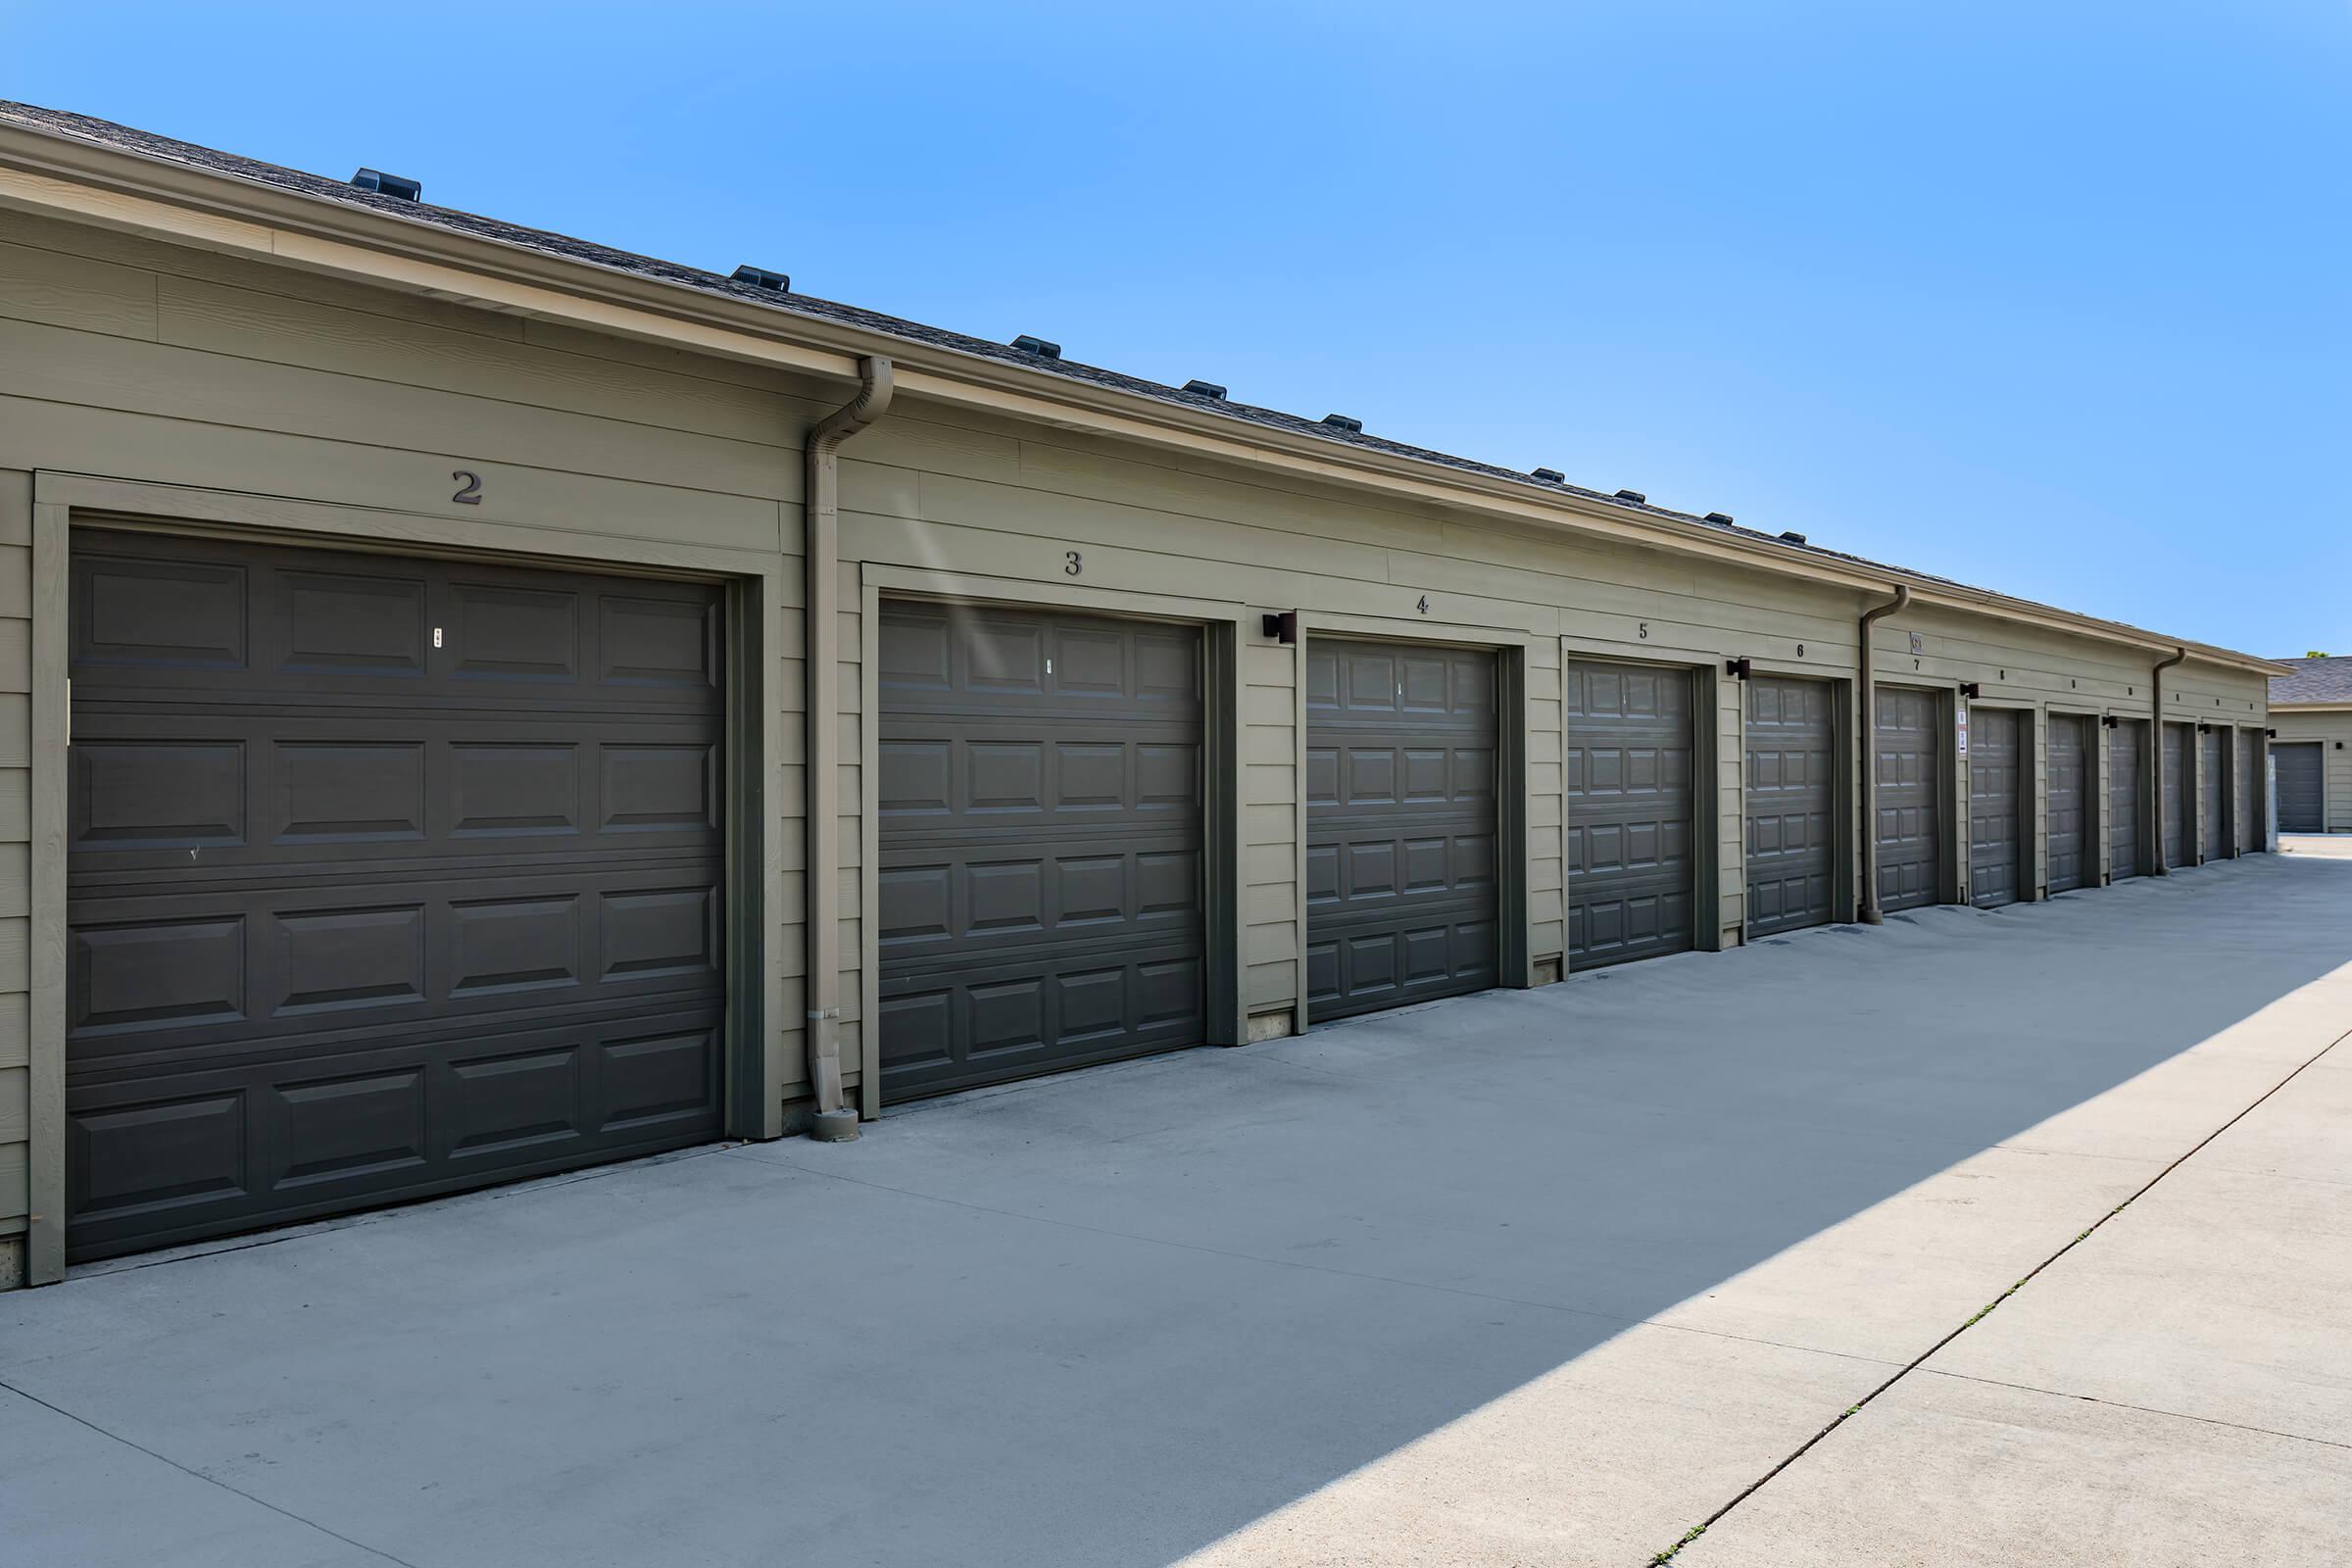 DETACHED GARAGES AT THE VIBE